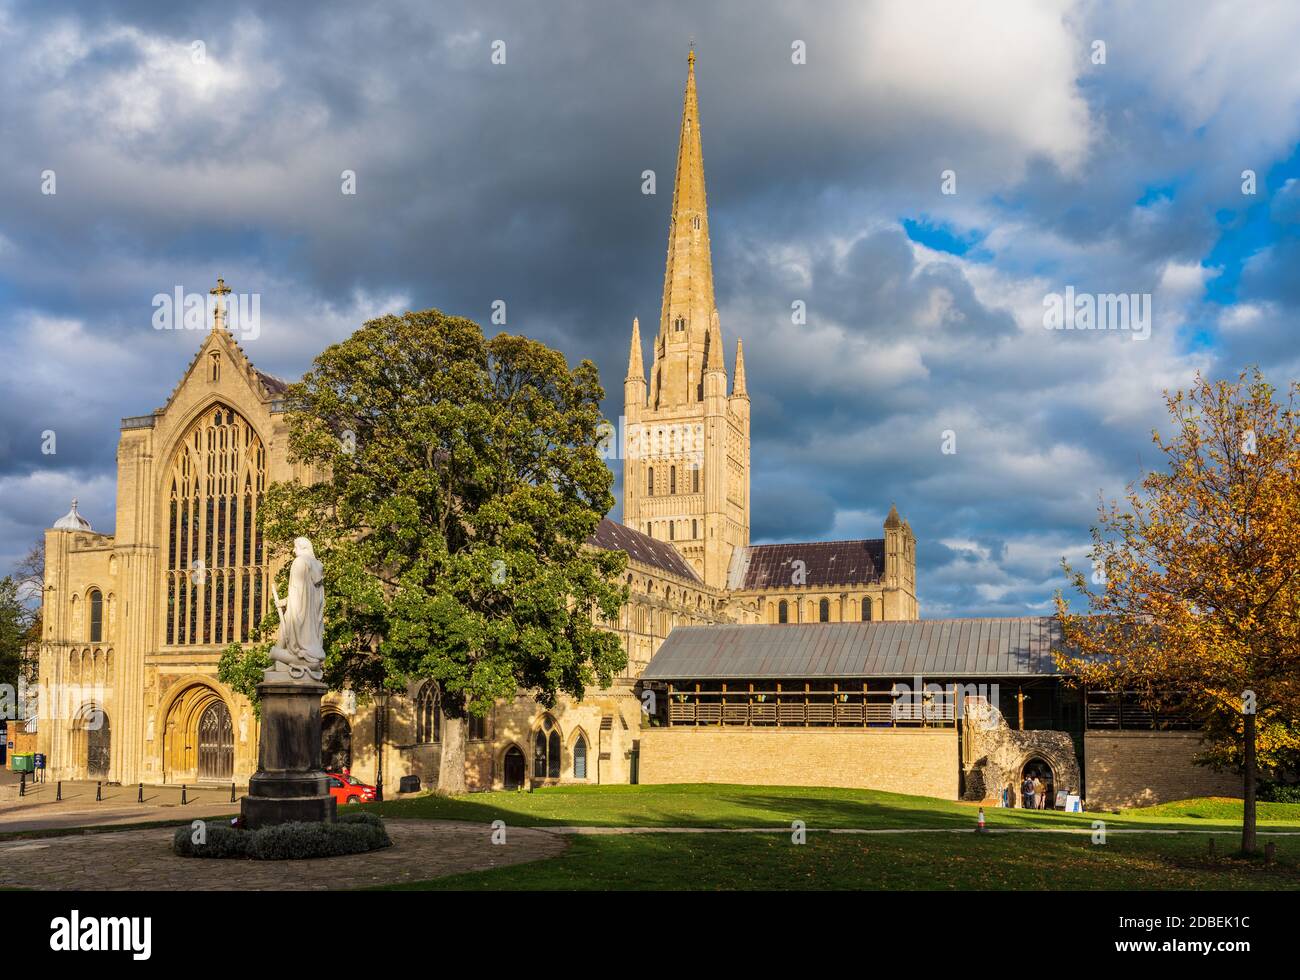 Norwich Cathedral Norwich Norfolk UK - work started on Norwich Cathedral in 1096, completed 1145. Cathedral Church of the Holy and Undivided Trinity. Stock Photo